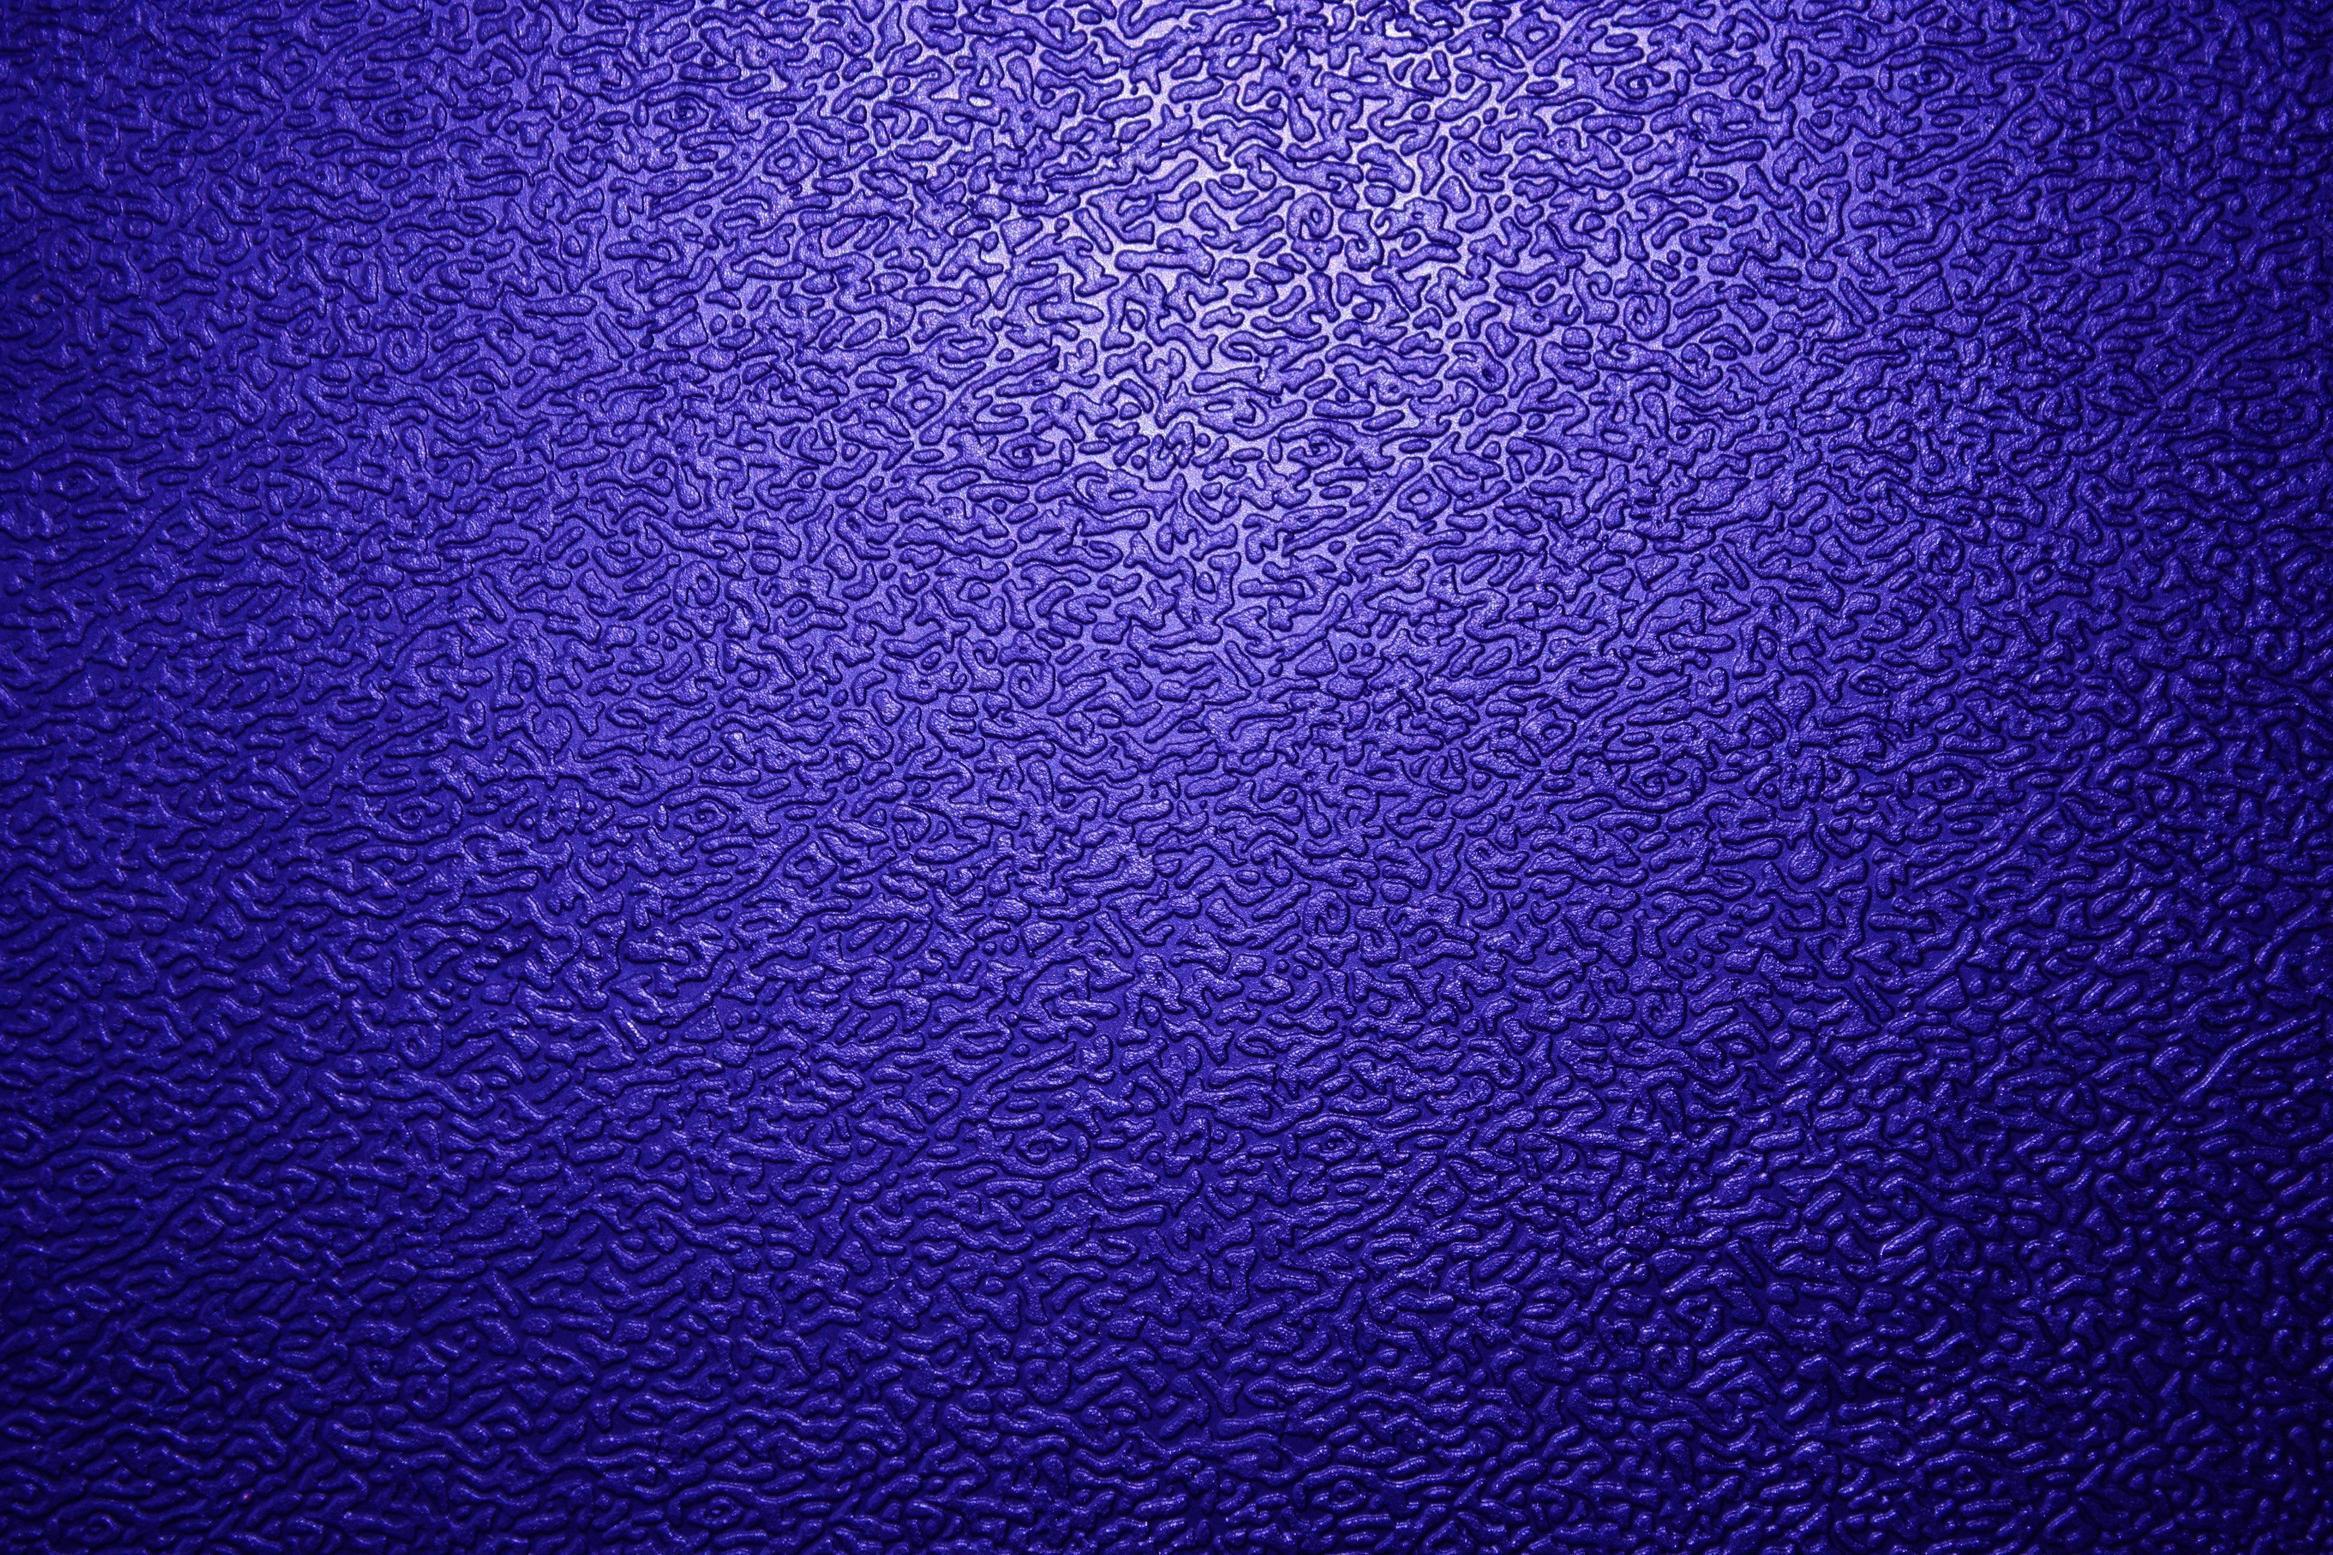 Textured Royal Blue Plastic Close Up Picture. Free Photograph